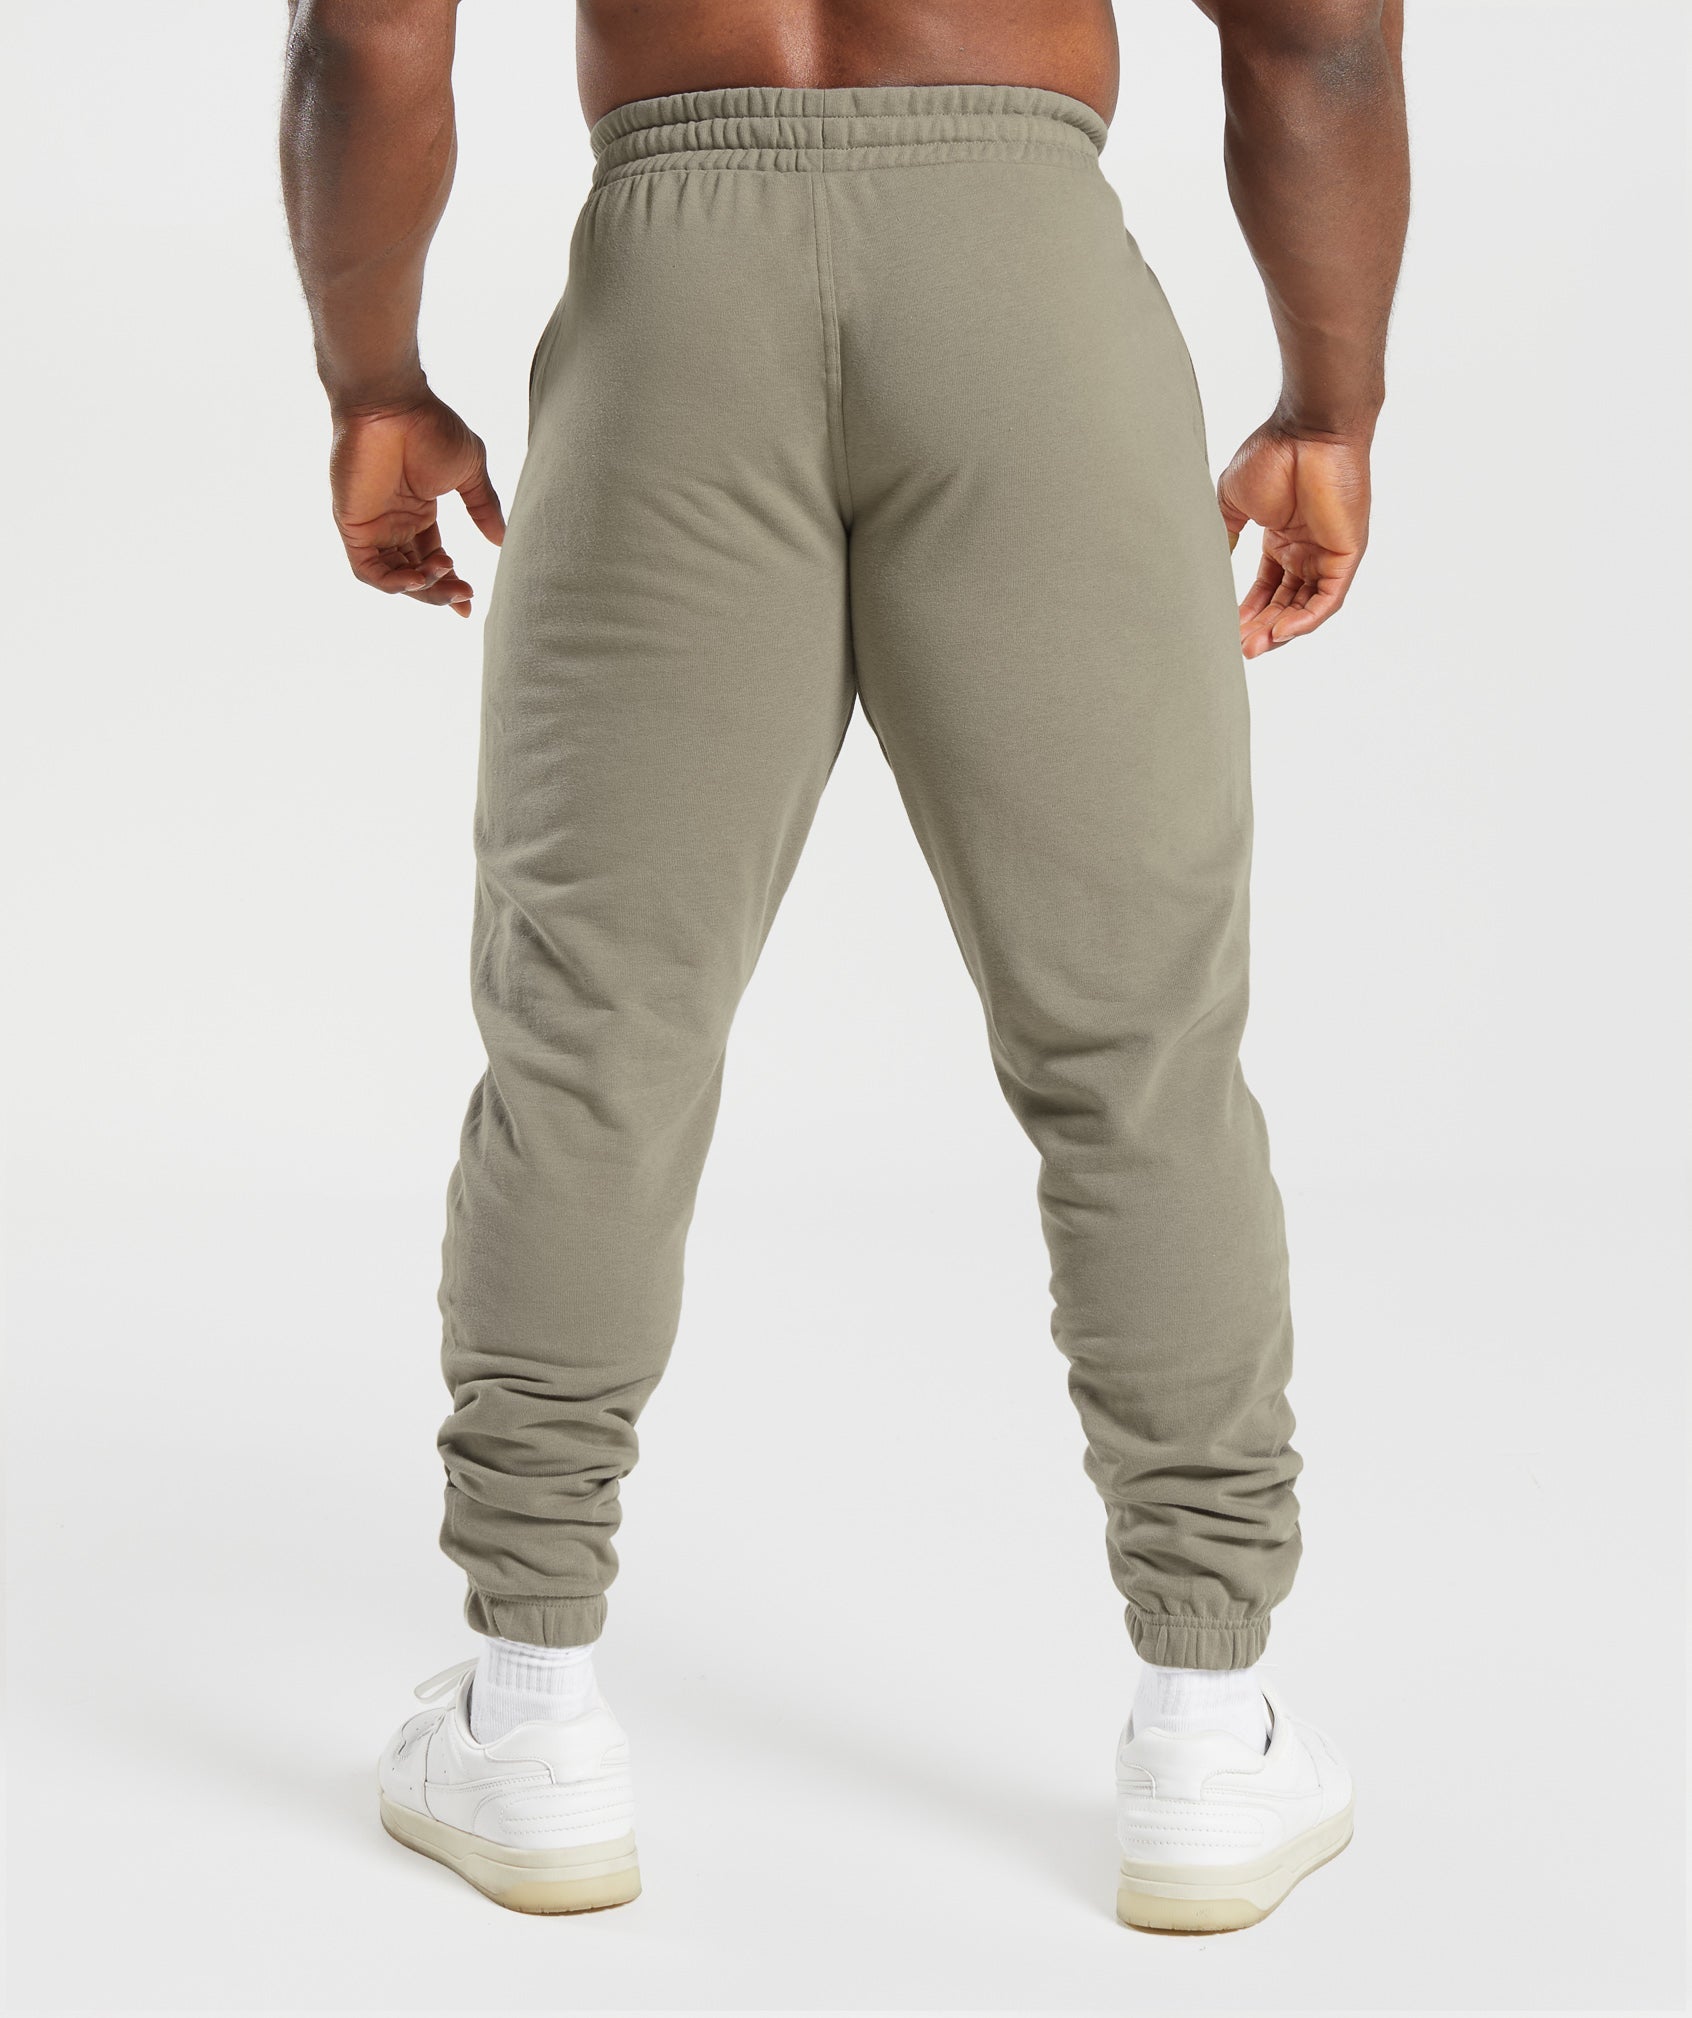 Gymshark Brown Athletic Sweat Pants for Women